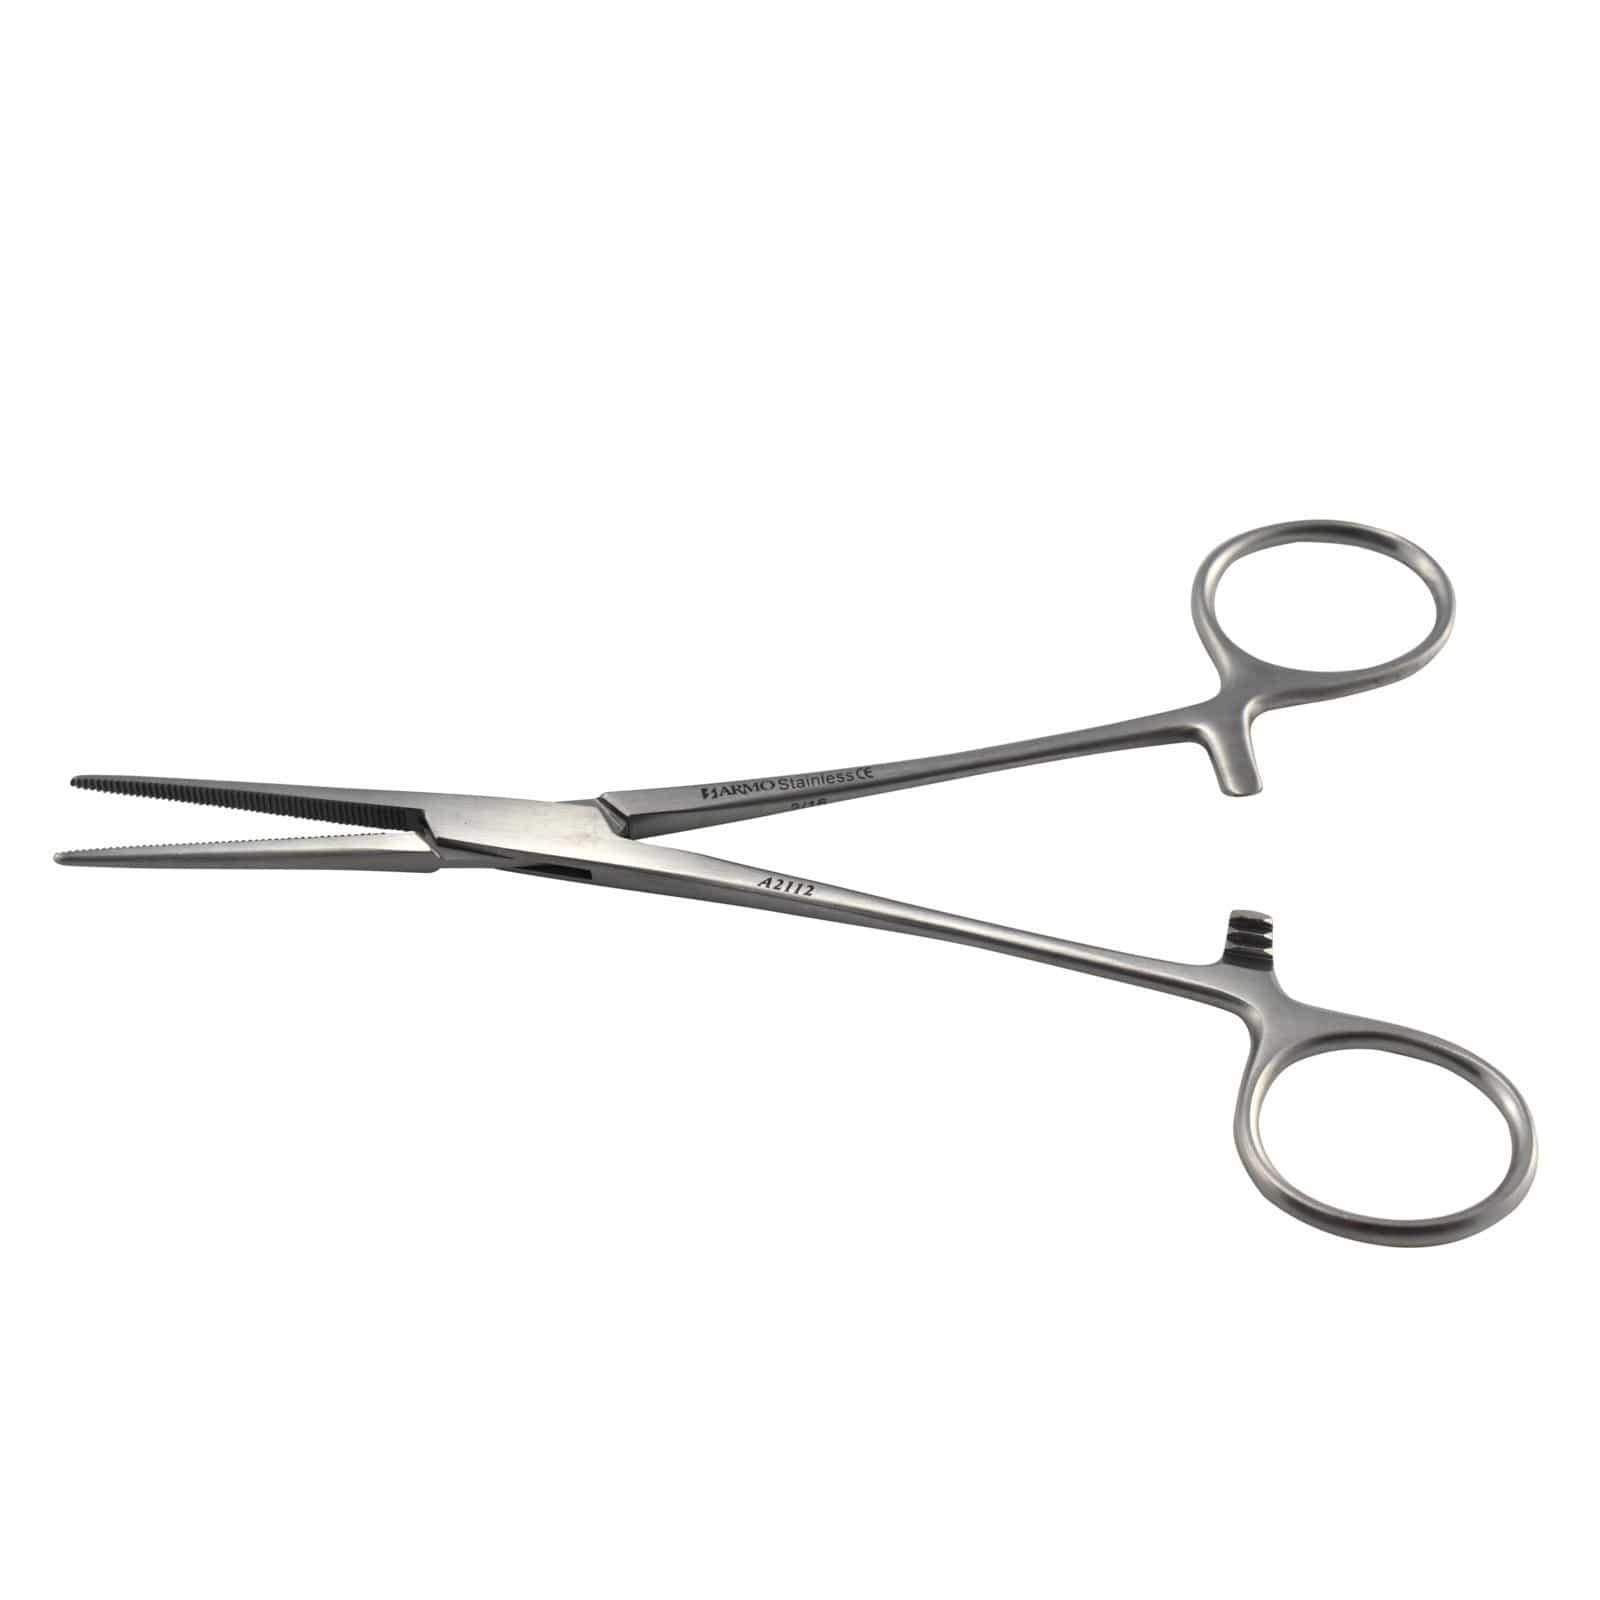 Armo Surgical Instruments 16cm / Straight Armo Crile Artery Forceps